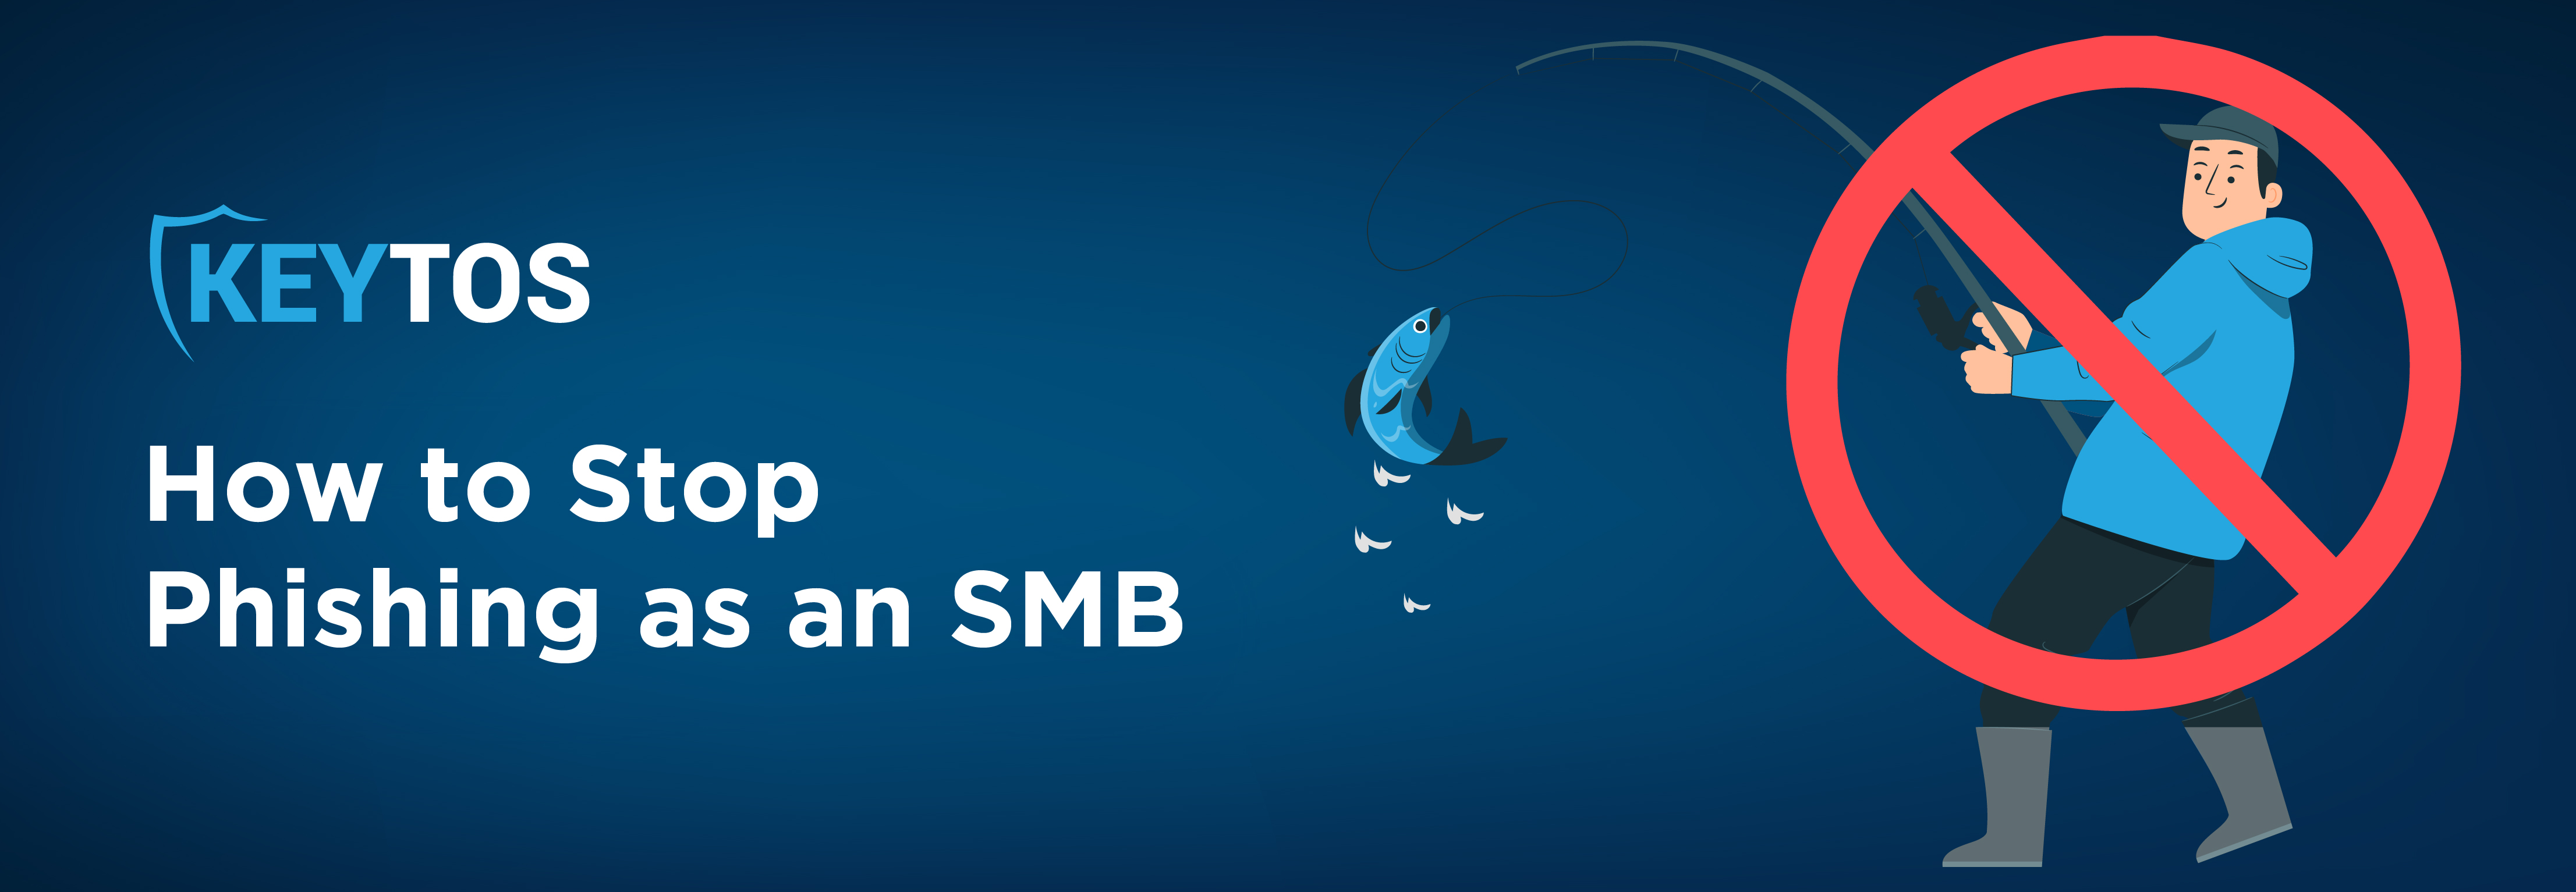 How to Prevent Phishing as an SMB